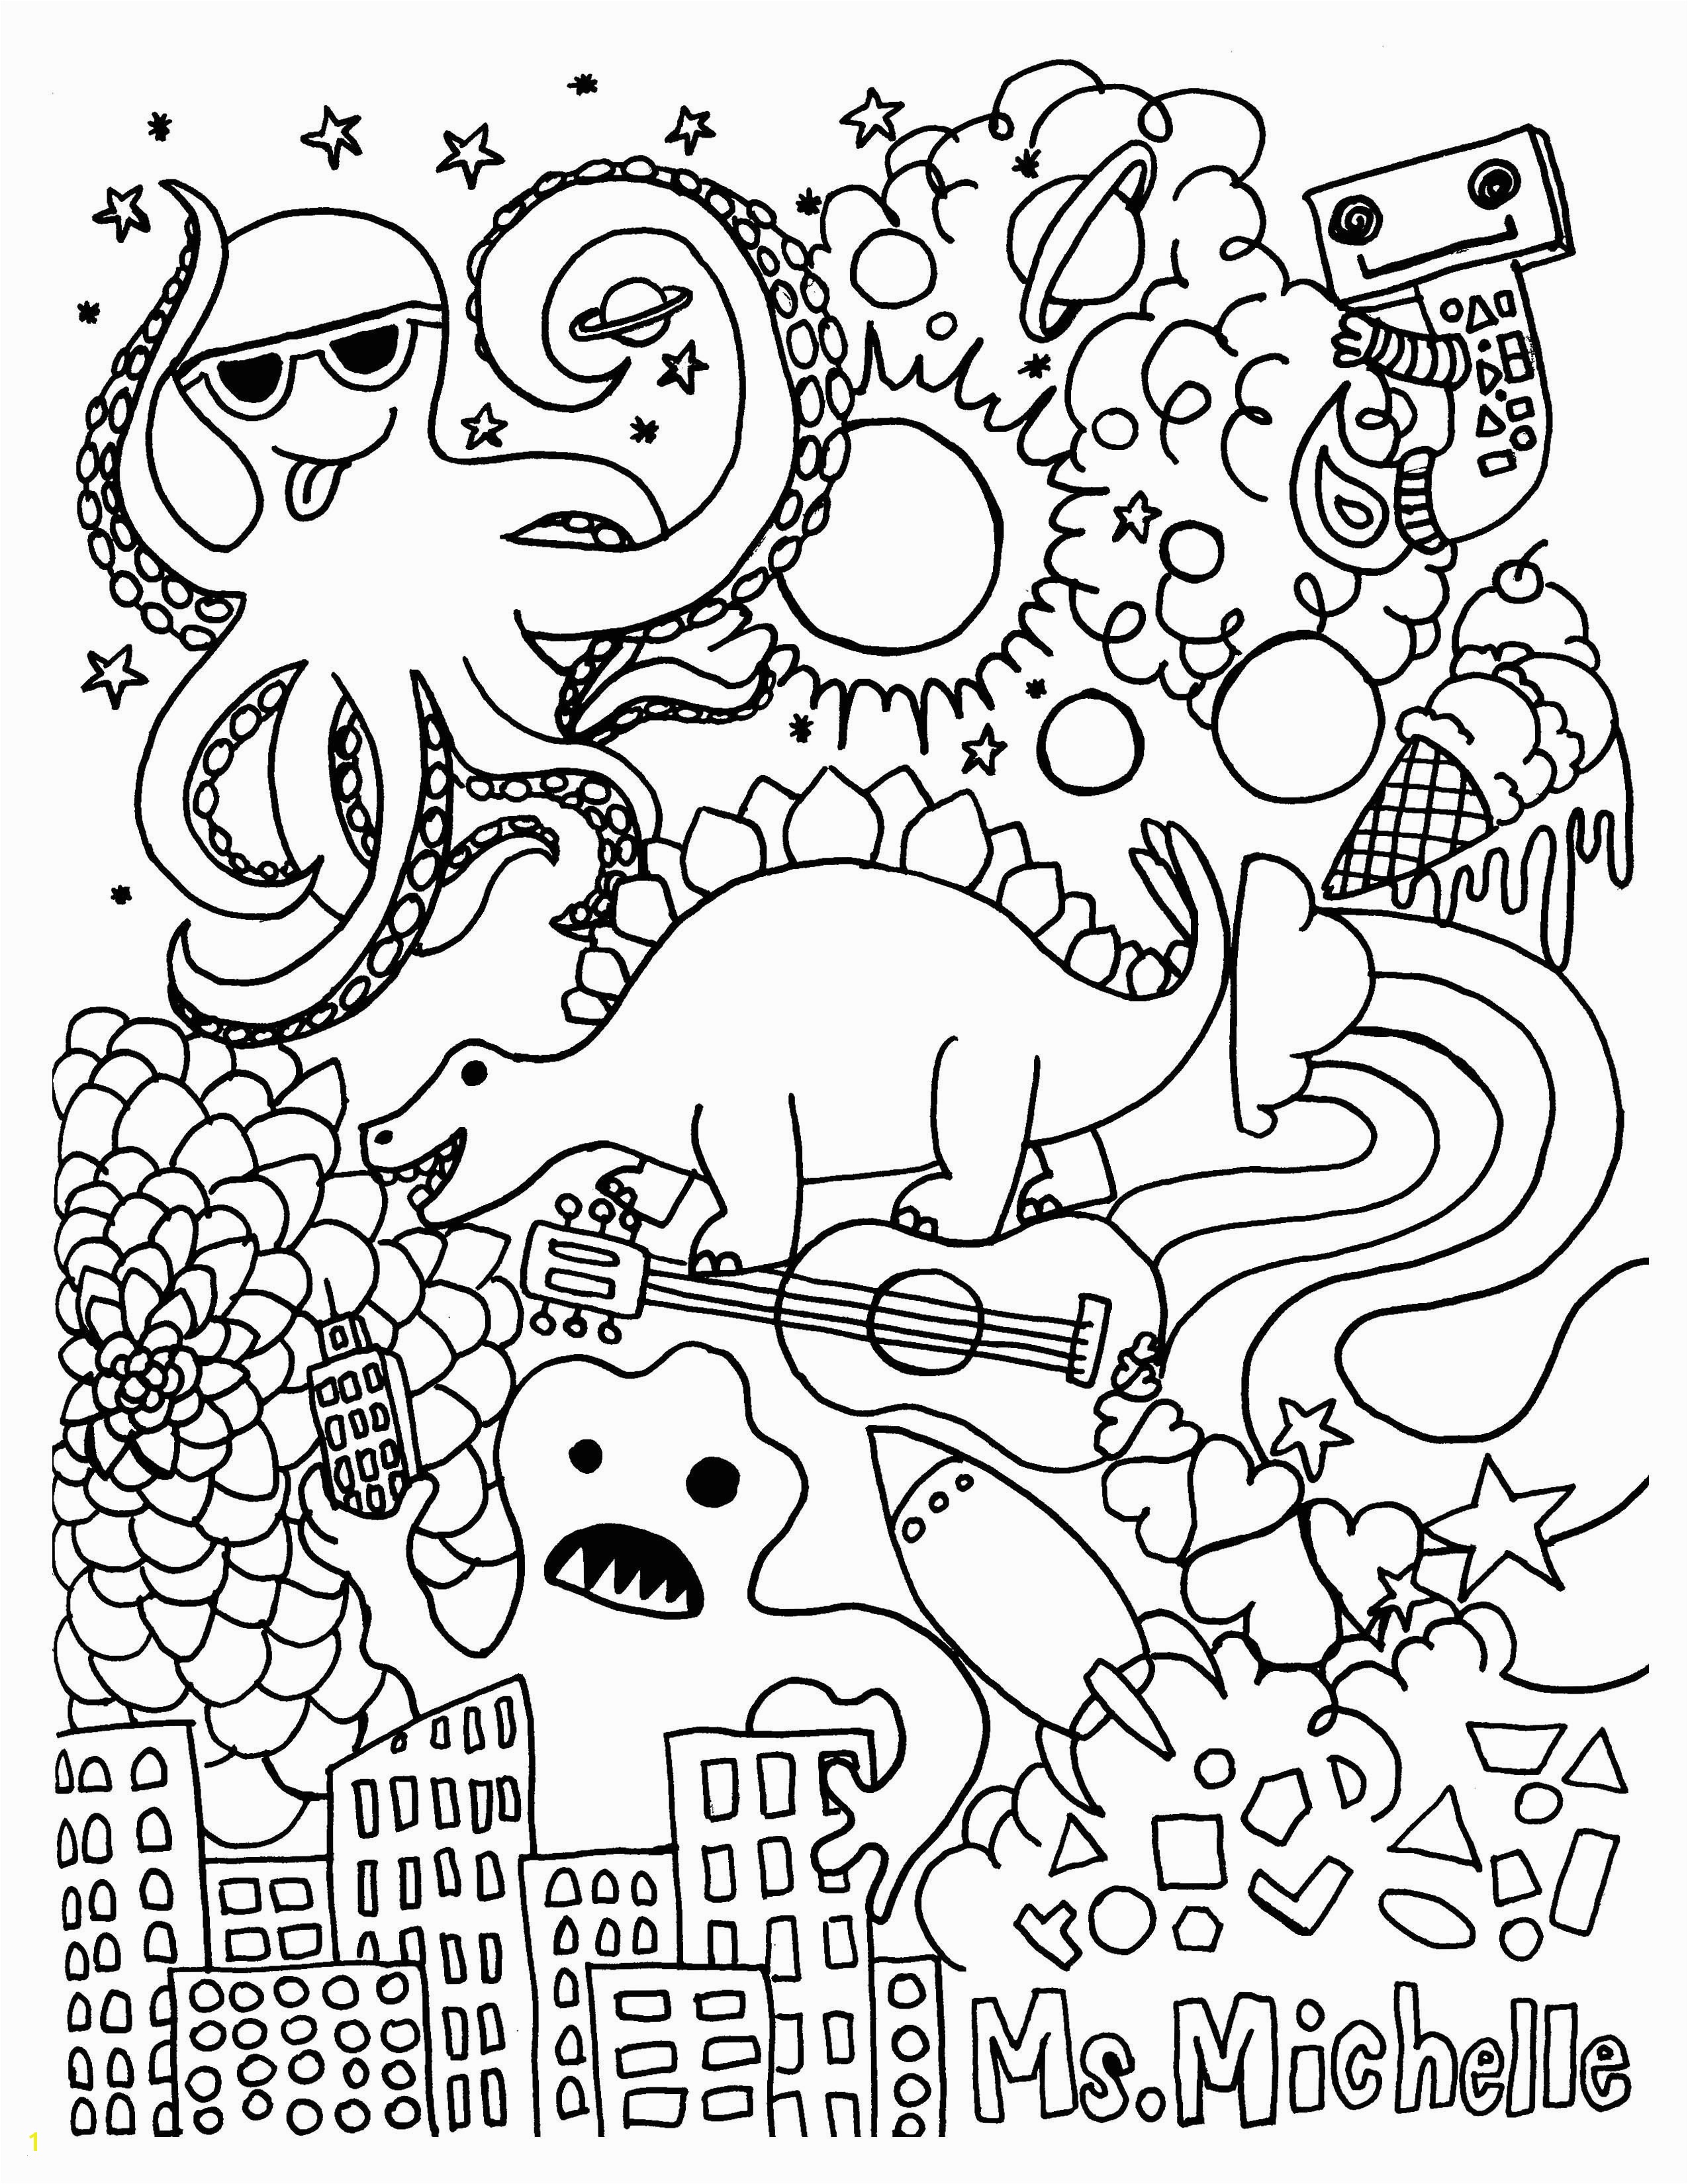 Dental Coloring Pages Free Carolyn Lucas Author at Mikalhameed